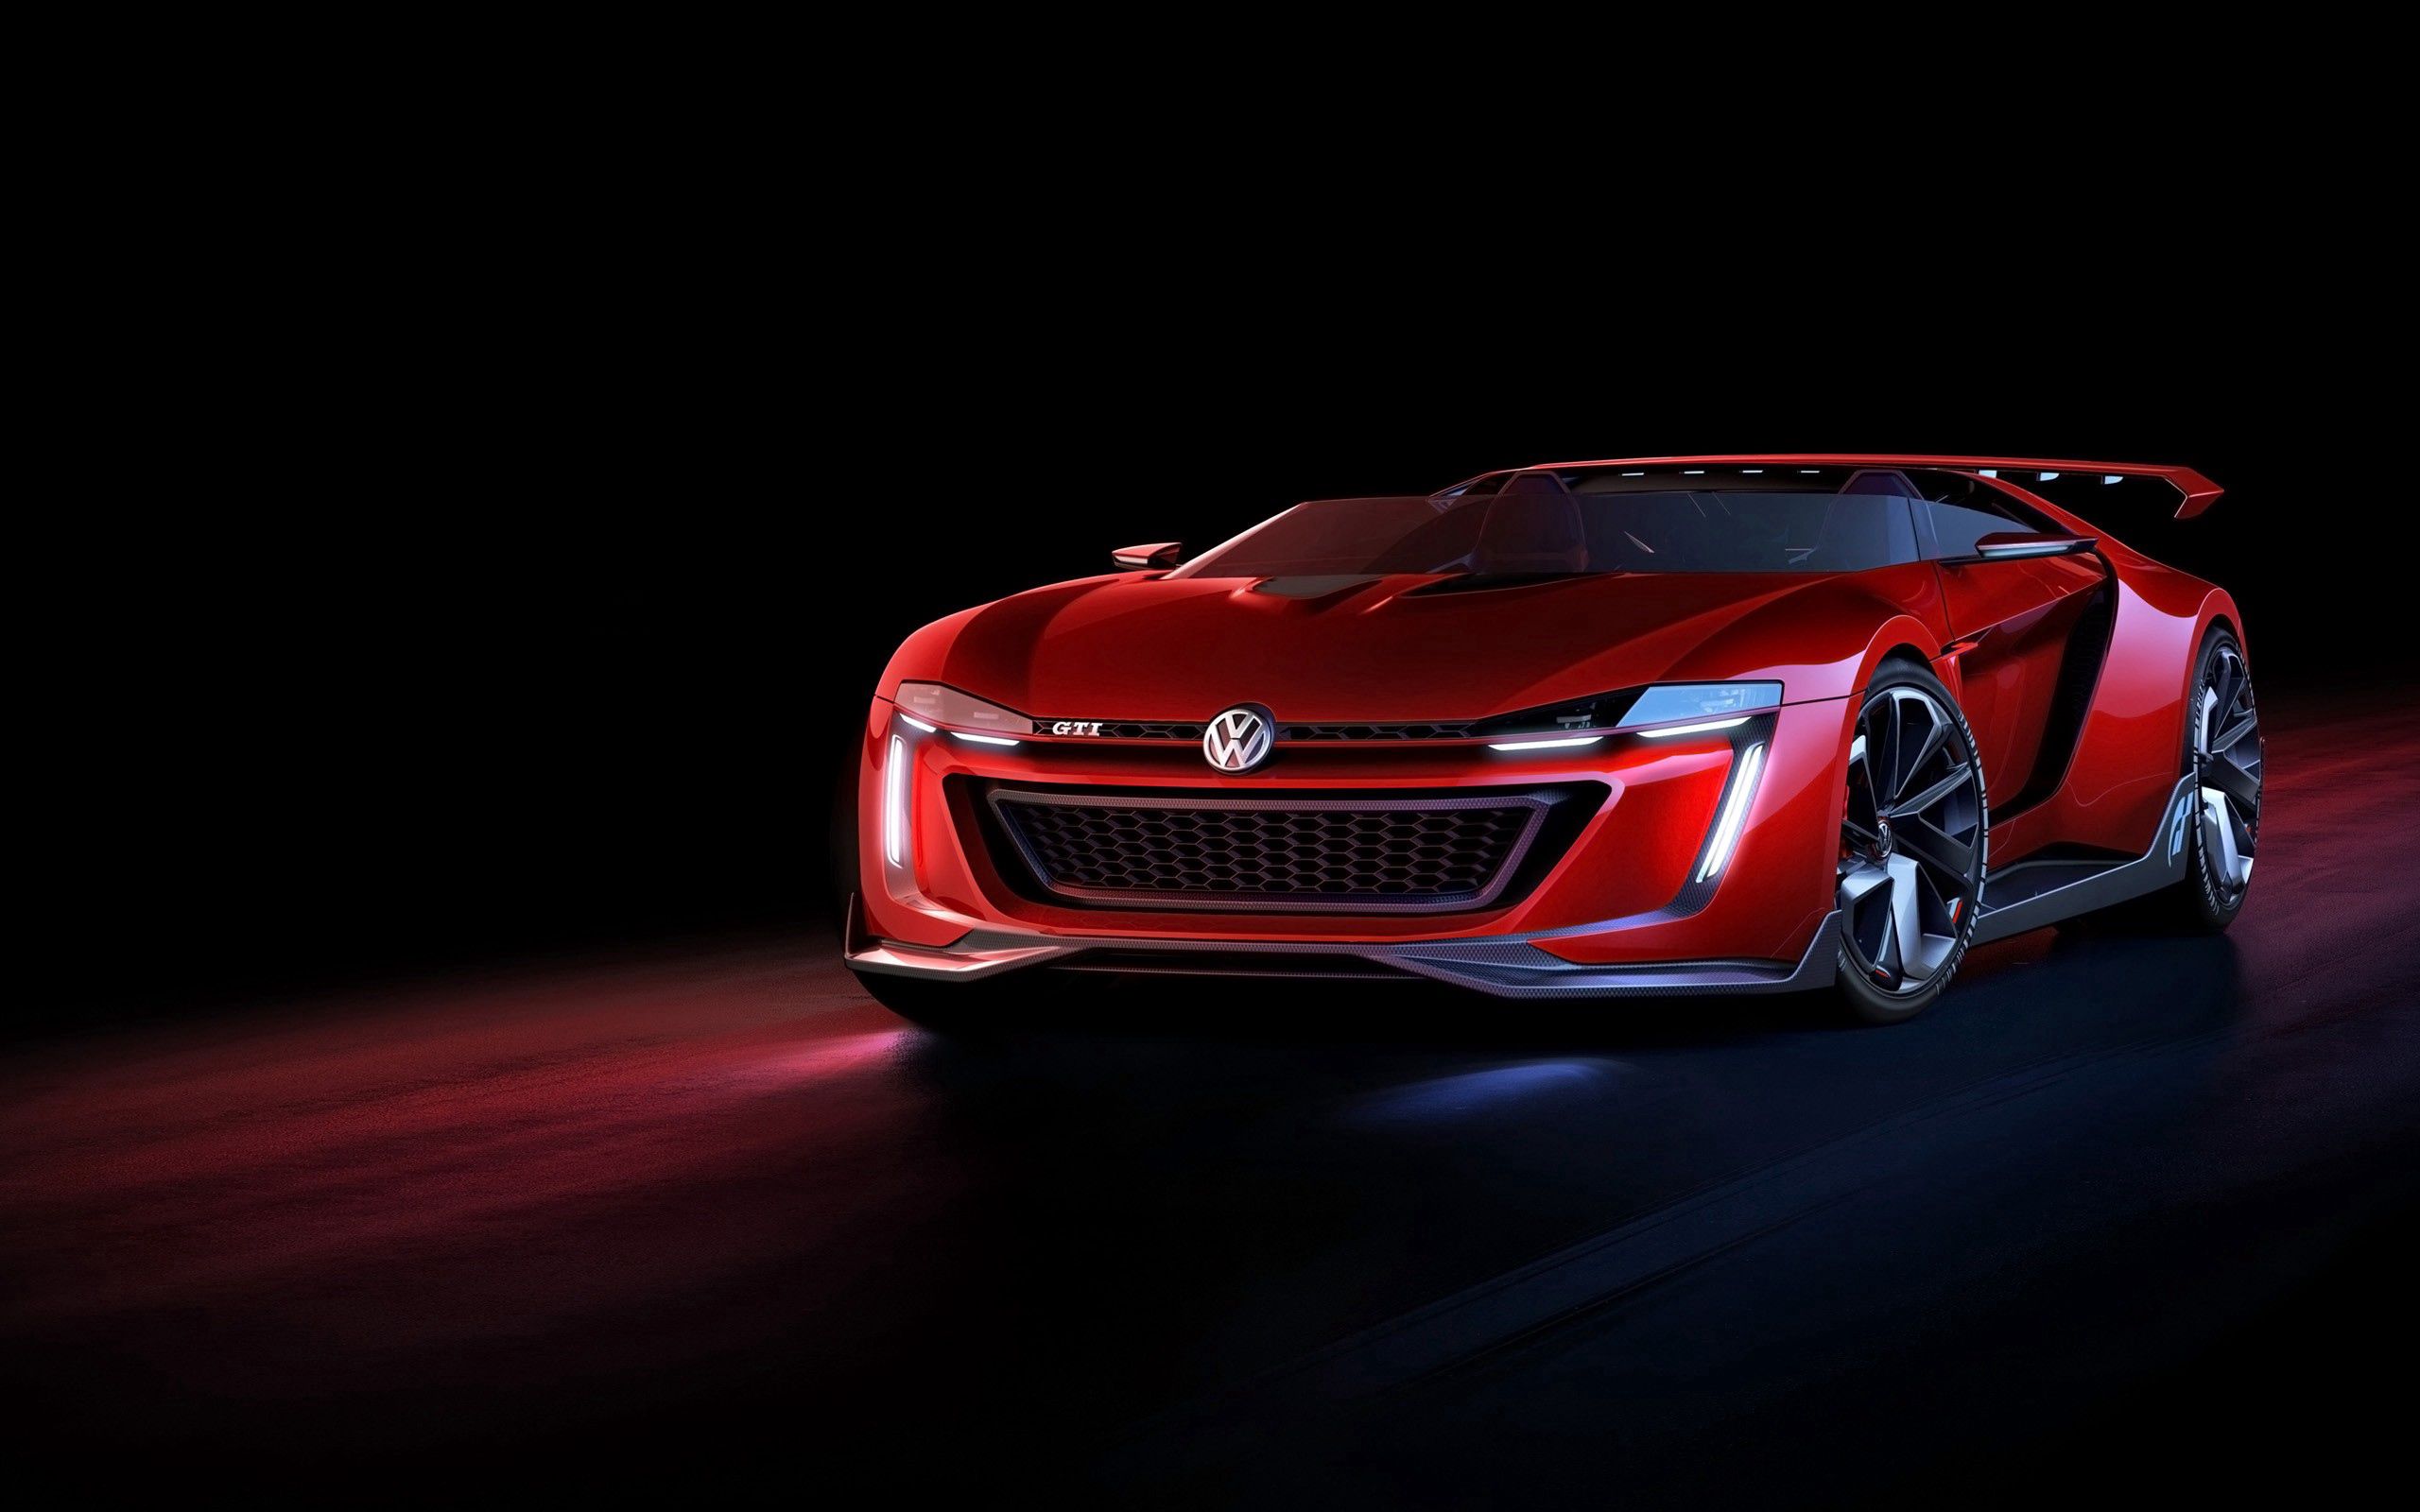 93154 download wallpaper volkswagen, cars, red, front view, roadster, gti screensavers and pictures for free